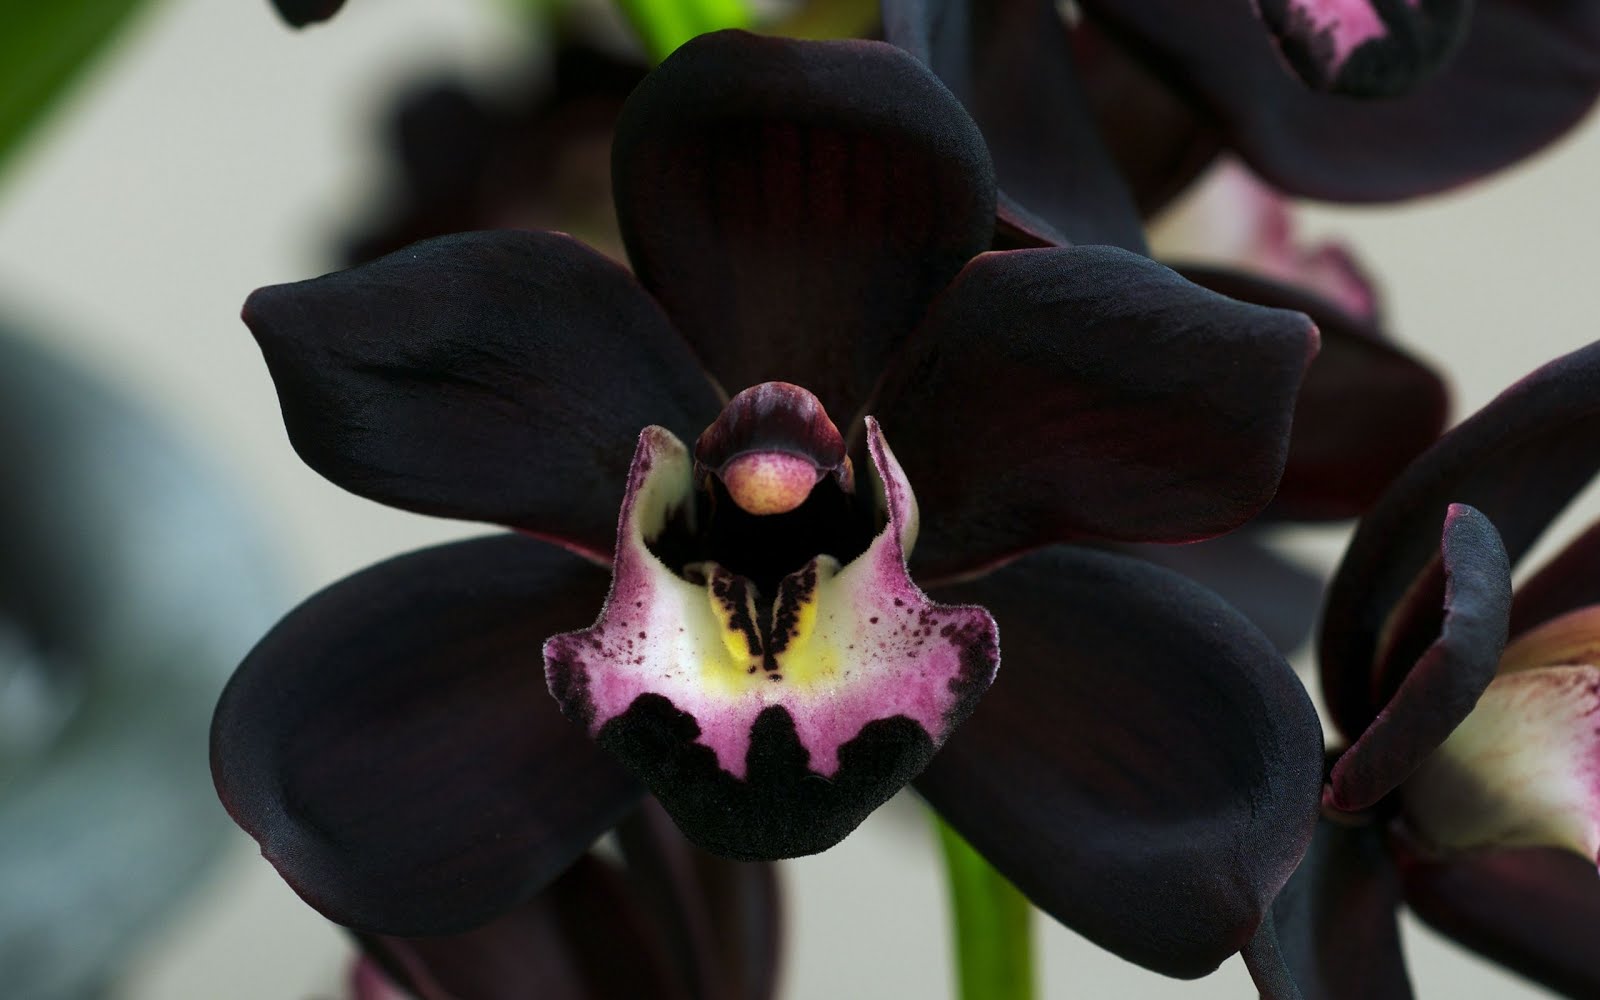 A Black Orchid...